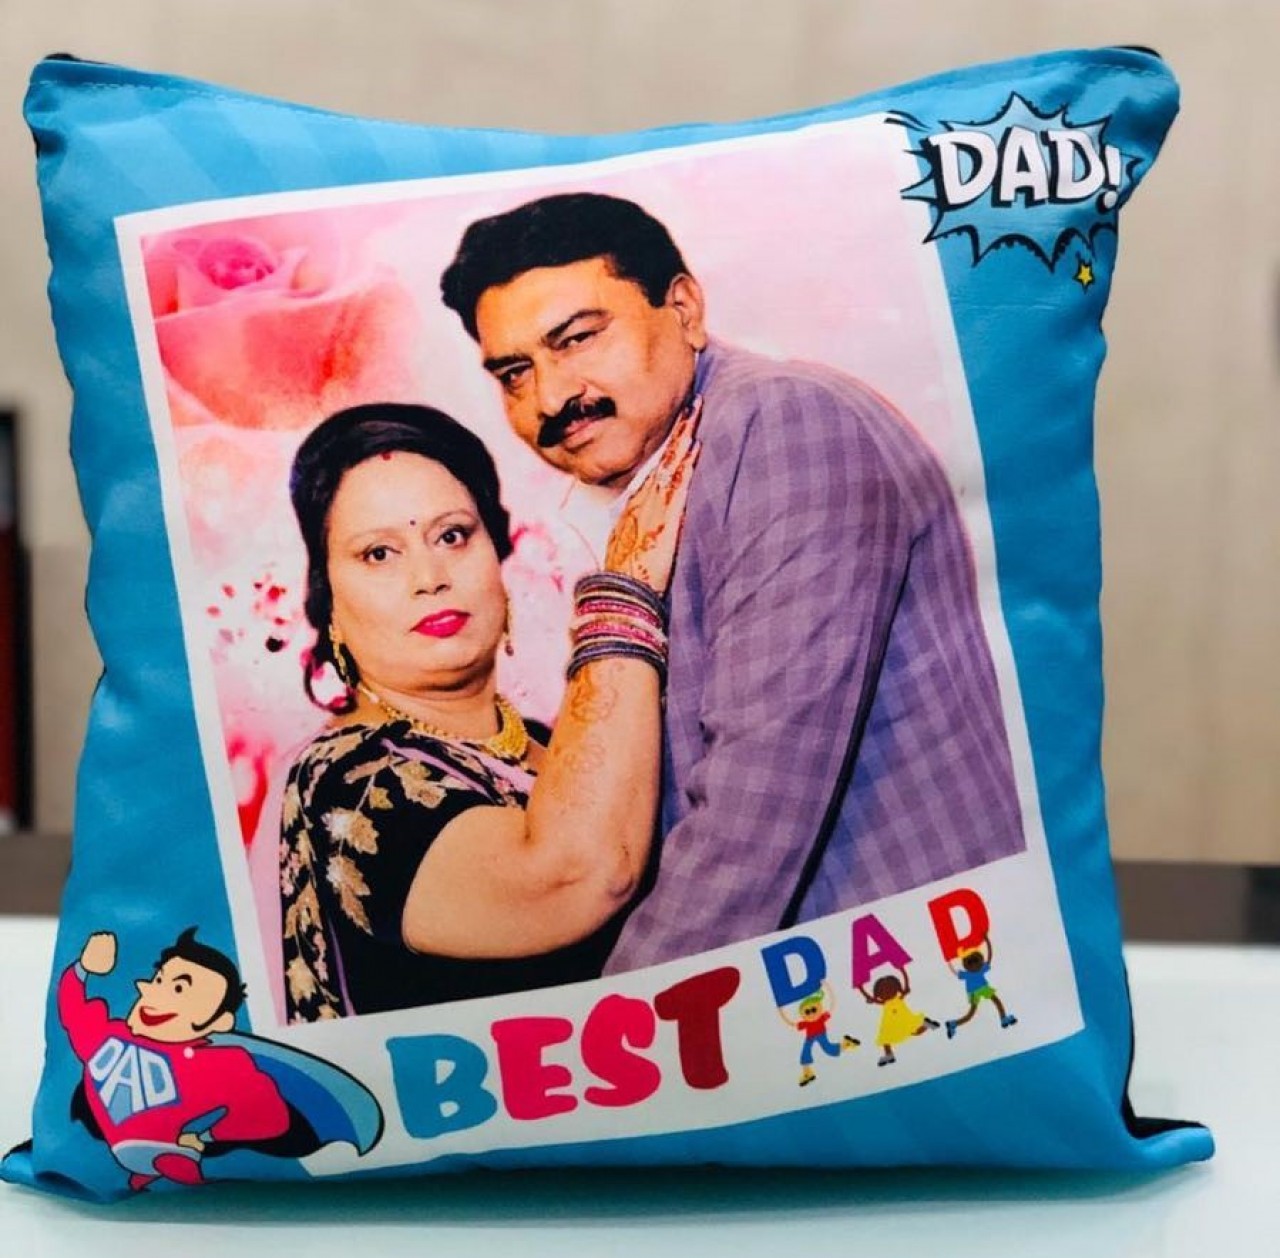 Personalized Best Dad Photo Cushion